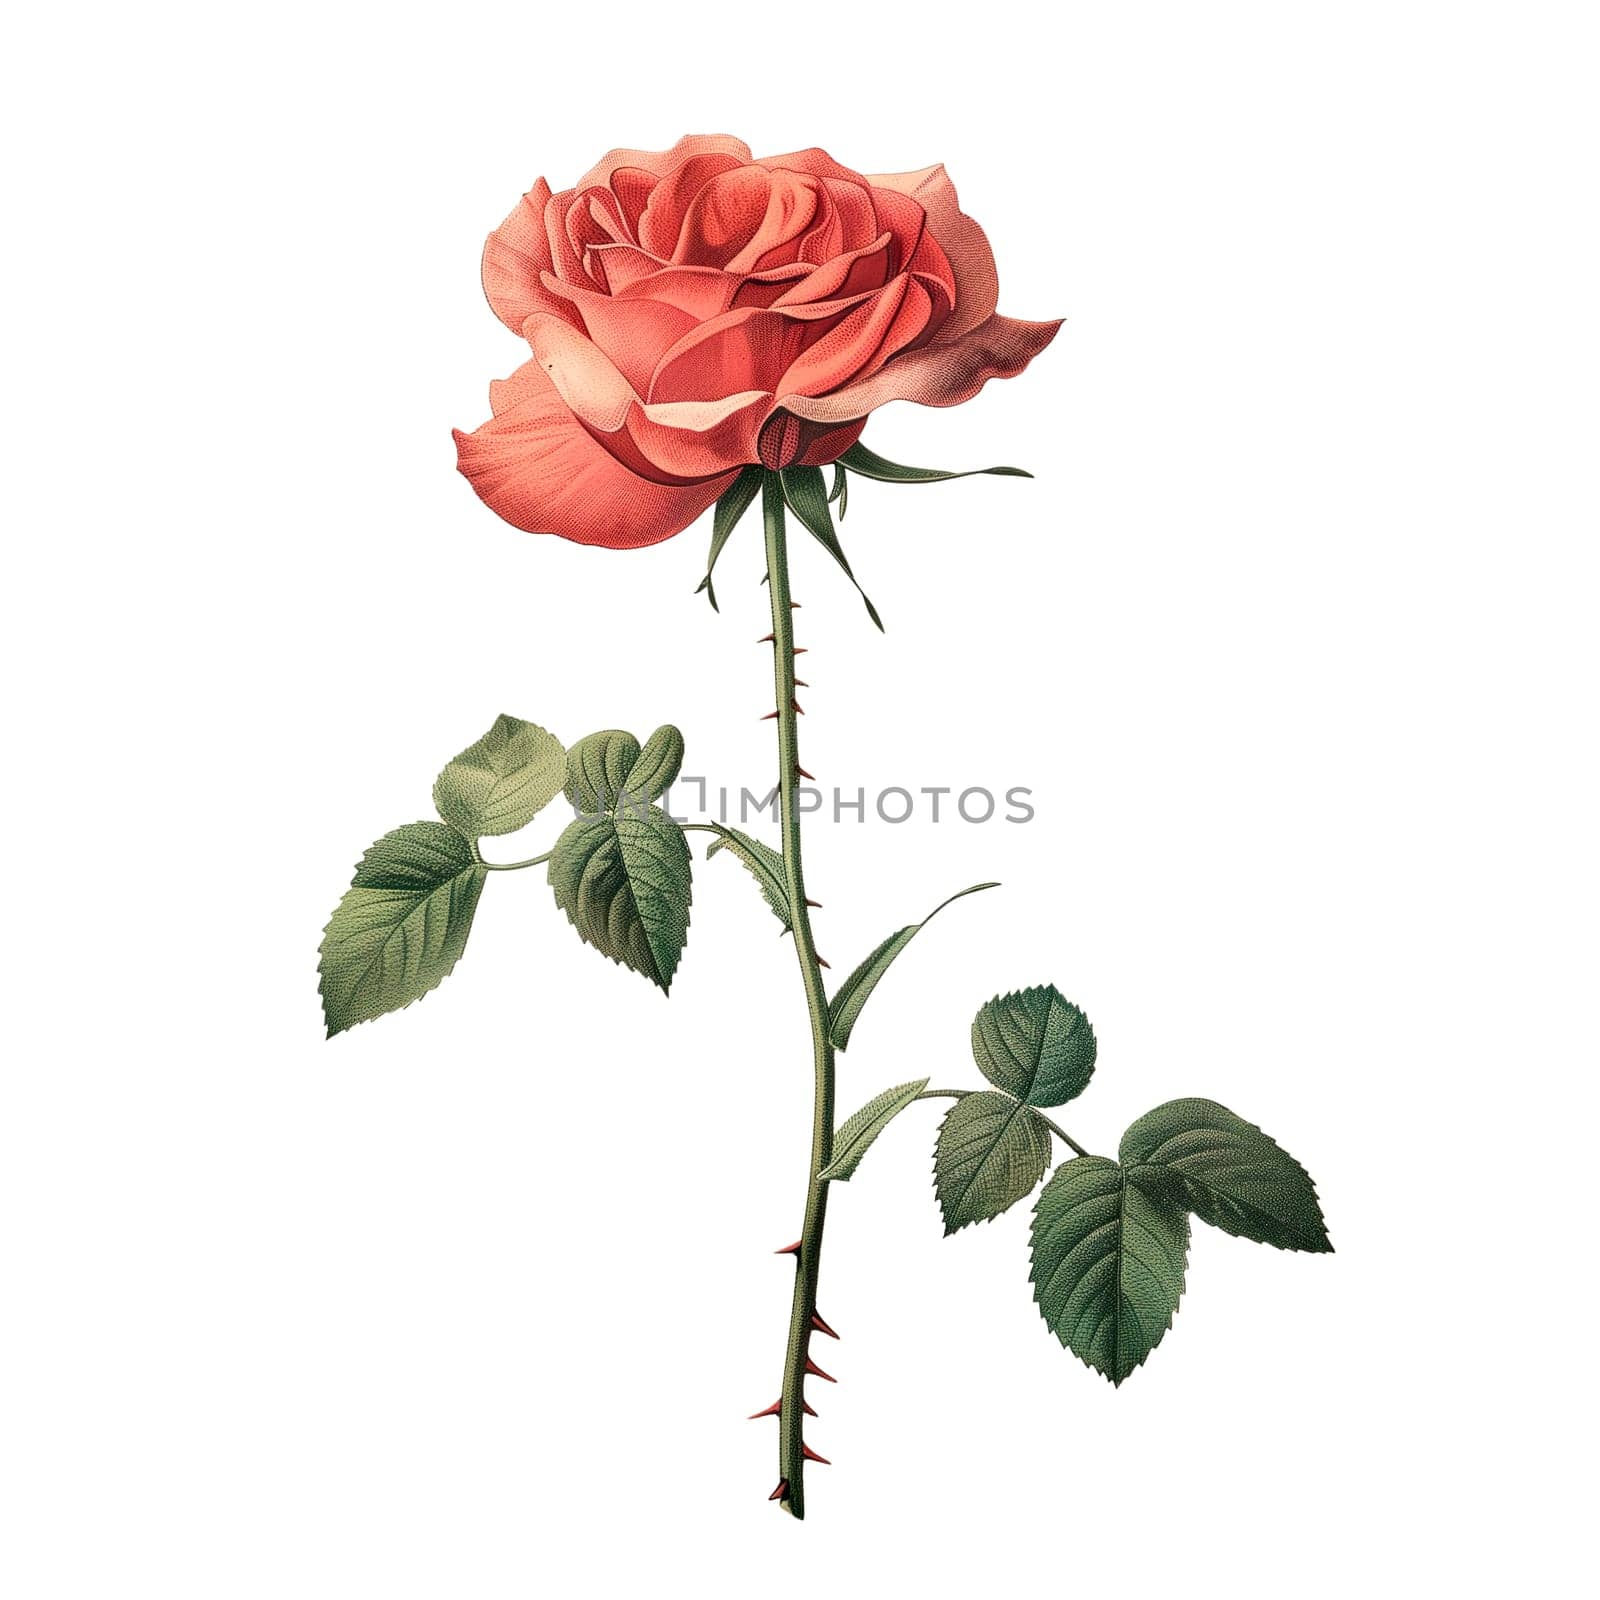 Isolated illustration of red rose flower by Dustick